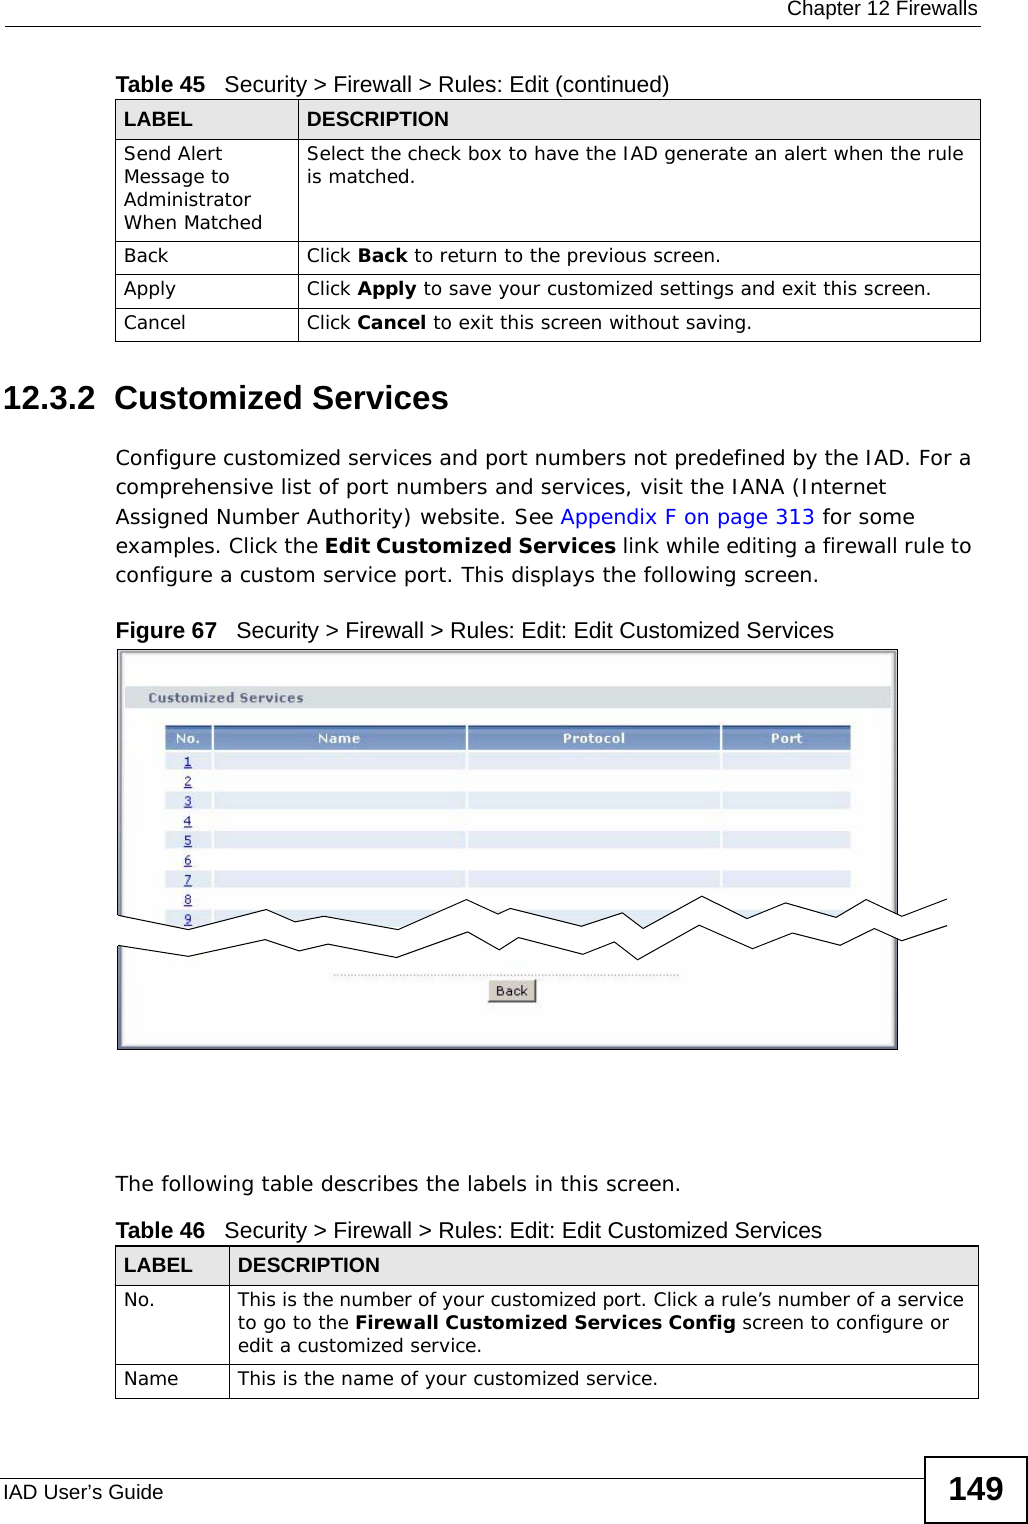  Chapter 12 FirewallsIAD User’s Guide 14912.3.2  Customized Services Configure customized services and port numbers not predefined by the IAD. For a comprehensive list of port numbers and services, visit the IANA (Internet Assigned Number Authority) website. See Appendix F on page 313 for some examples. Click the Edit Customized Services link while editing a firewall rule to configure a custom service port. This displays the following screen. Figure 67   Security &gt; Firewall &gt; Rules: Edit: Edit Customized ServicesThe following table describes the labels in this screen. Send Alert Message to Administrator When MatchedSelect the check box to have the IAD generate an alert when the rule is matched.Back Click Back to return to the previous screen.Apply Click Apply to save your customized settings and exit this screen.Cancel Click Cancel to exit this screen without saving.Table 45   Security &gt; Firewall &gt; Rules: Edit (continued)LABEL DESCRIPTIONTable 46   Security &gt; Firewall &gt; Rules: Edit: Edit Customized ServicesLABEL DESCRIPTIONNo. This is the number of your customized port. Click a rule’s number of a service to go to the Firewall Customized Services Config screen to configure or edit a customized service.Name This is the name of your customized service.